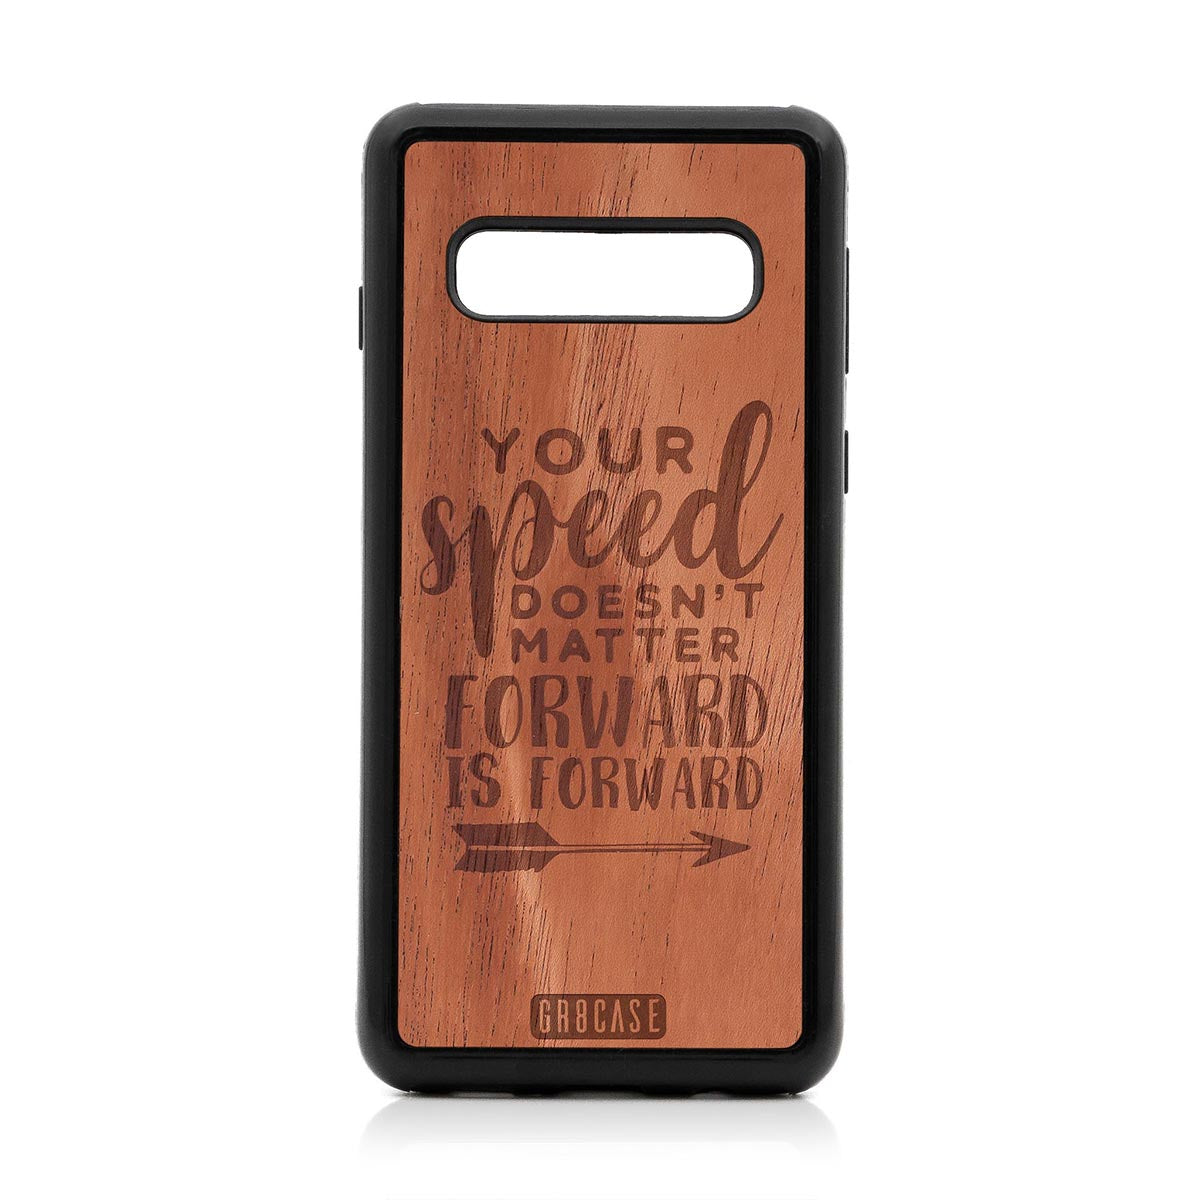 Your Speed Doesn't Matter Forward Is Forward Design Wood Case For Samsung Galaxy S10